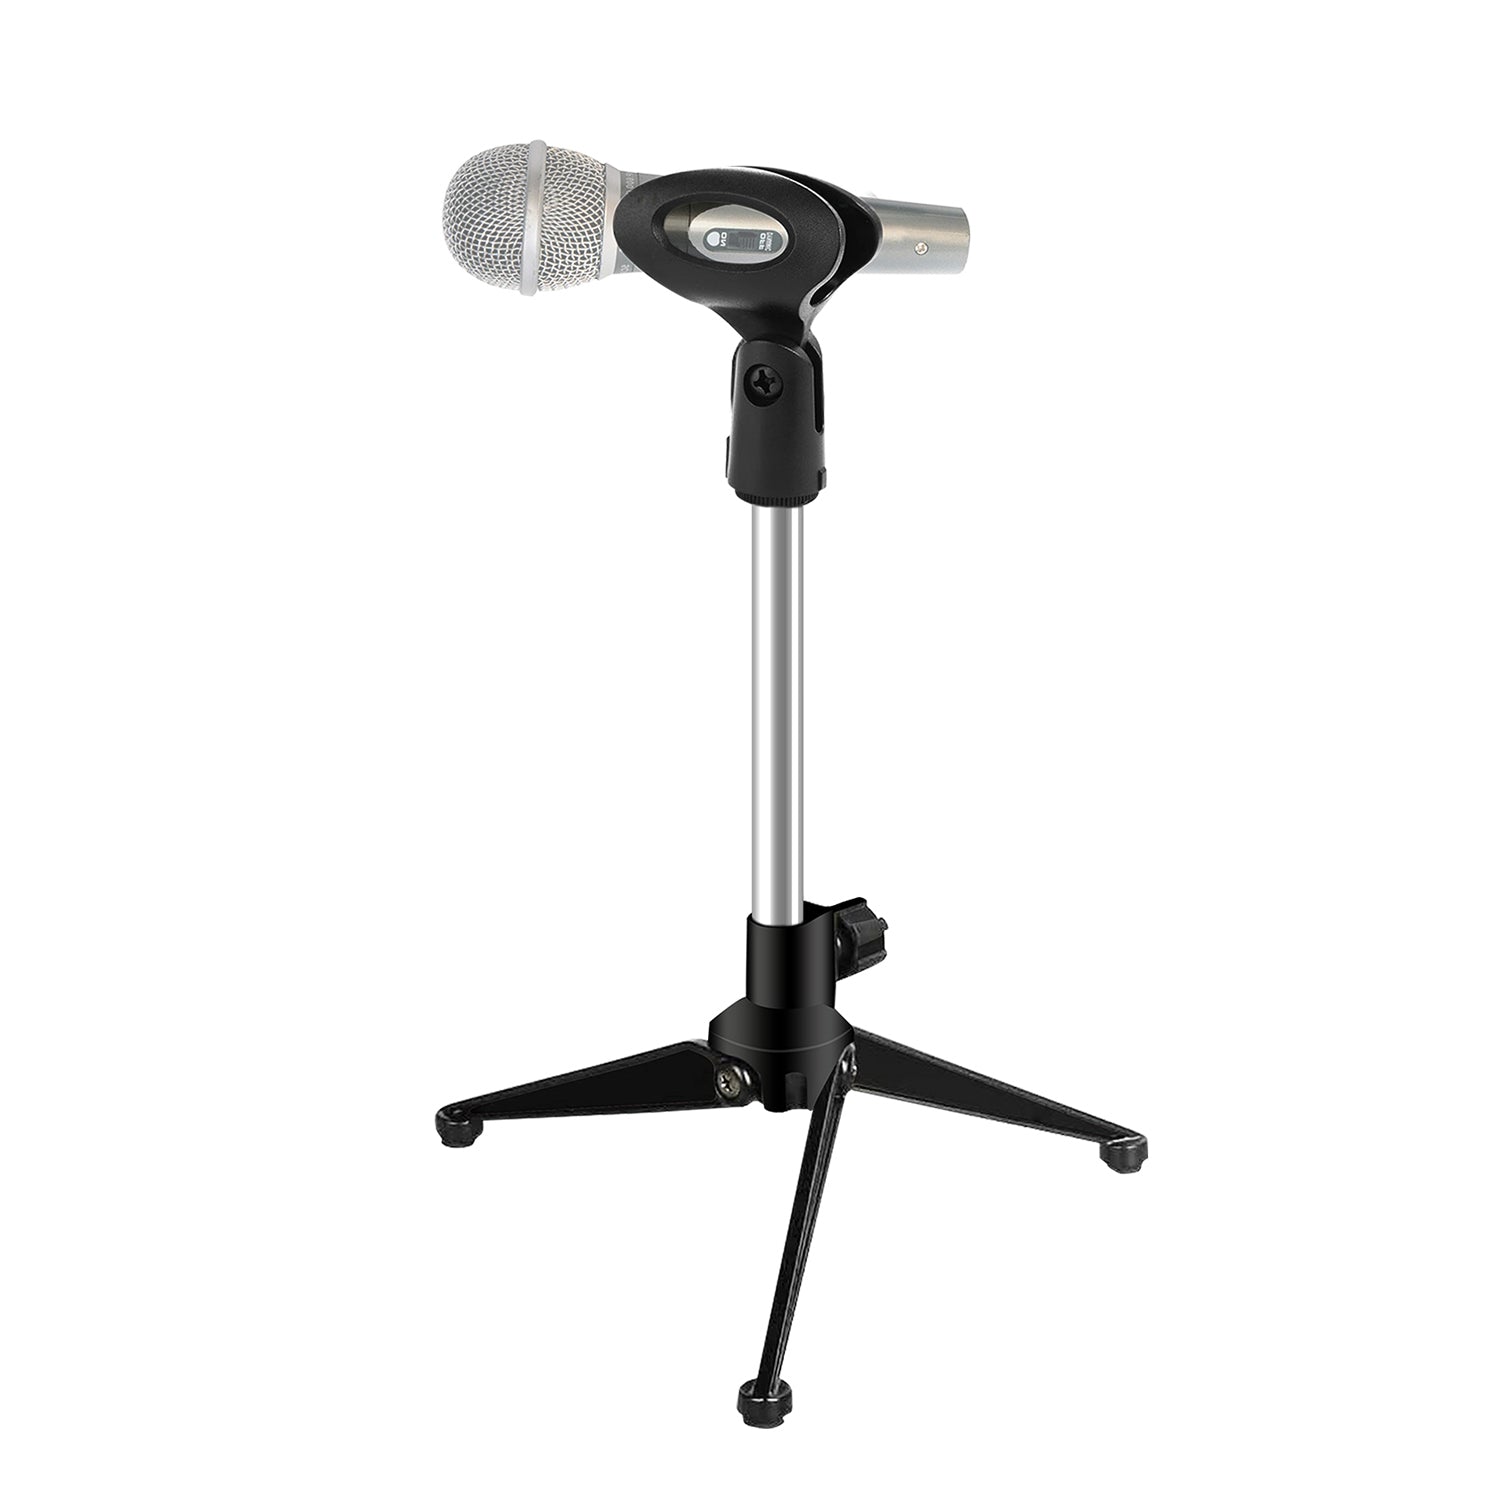 5 Core Mic Stand Desk Tripod Universal Desktop Adjustable Table Top Microphone Stand